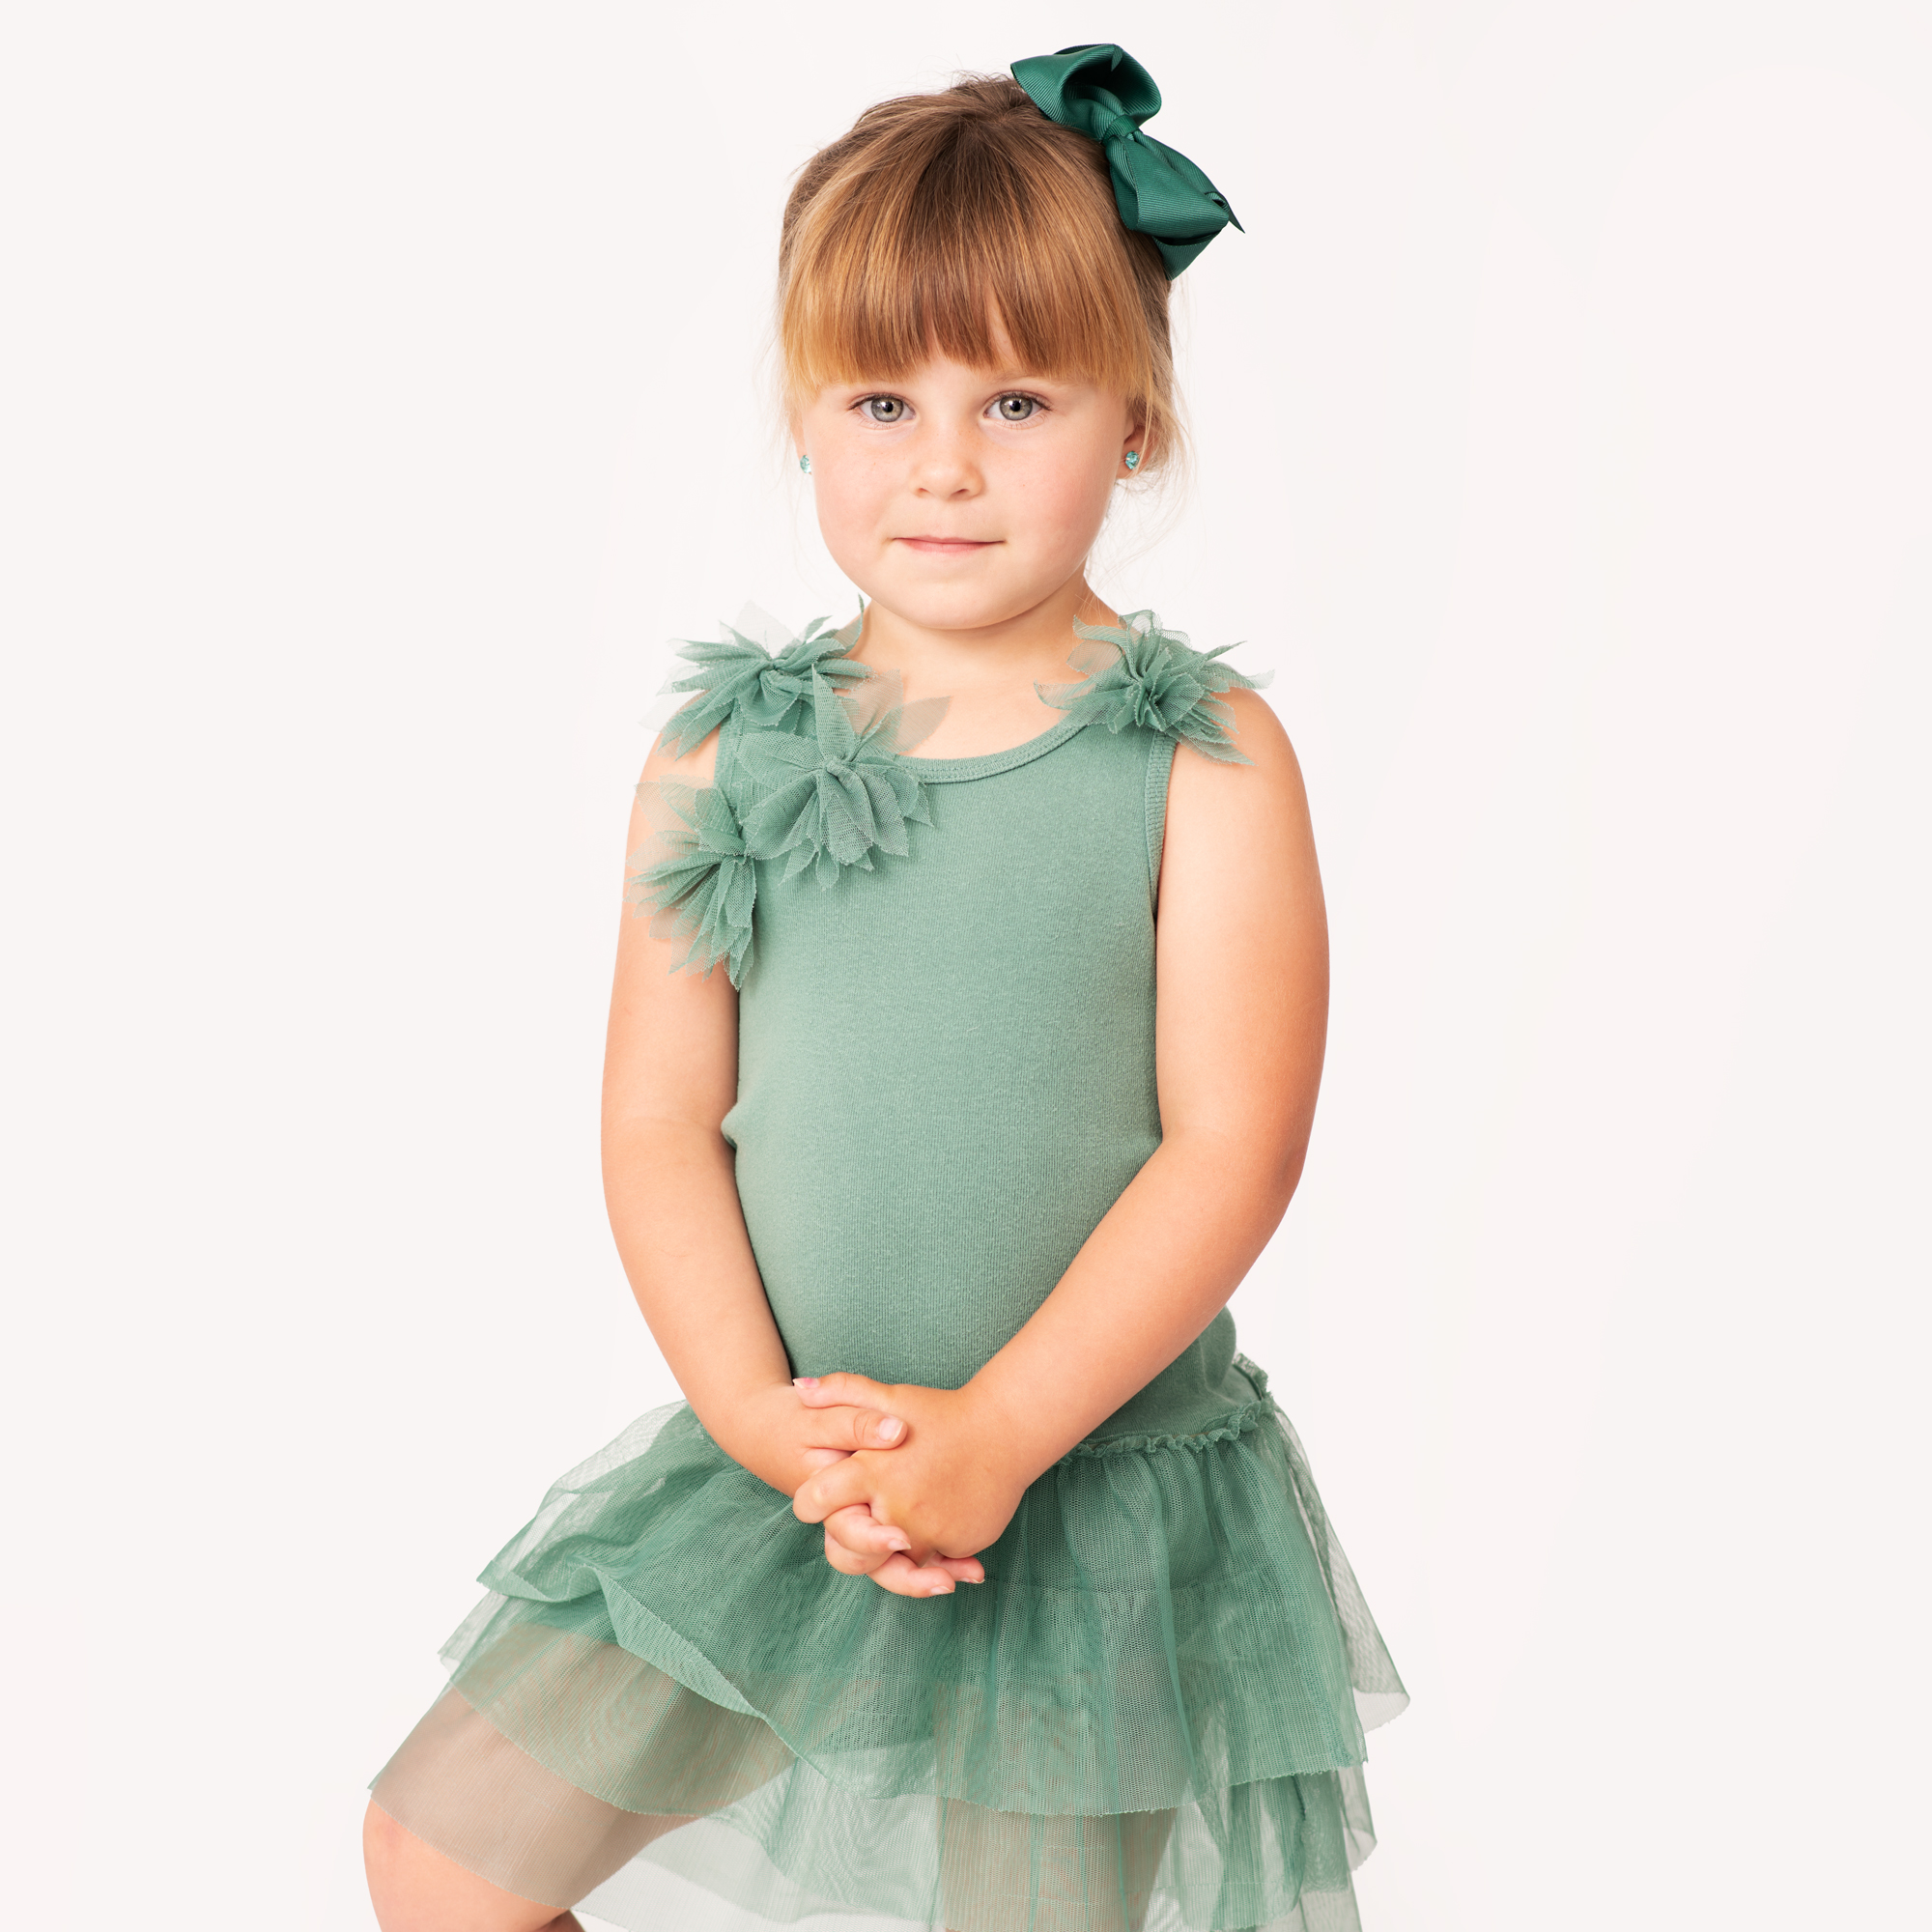 A young girl poses for her childrens model portfolio session. She wears a green dress on a white background.